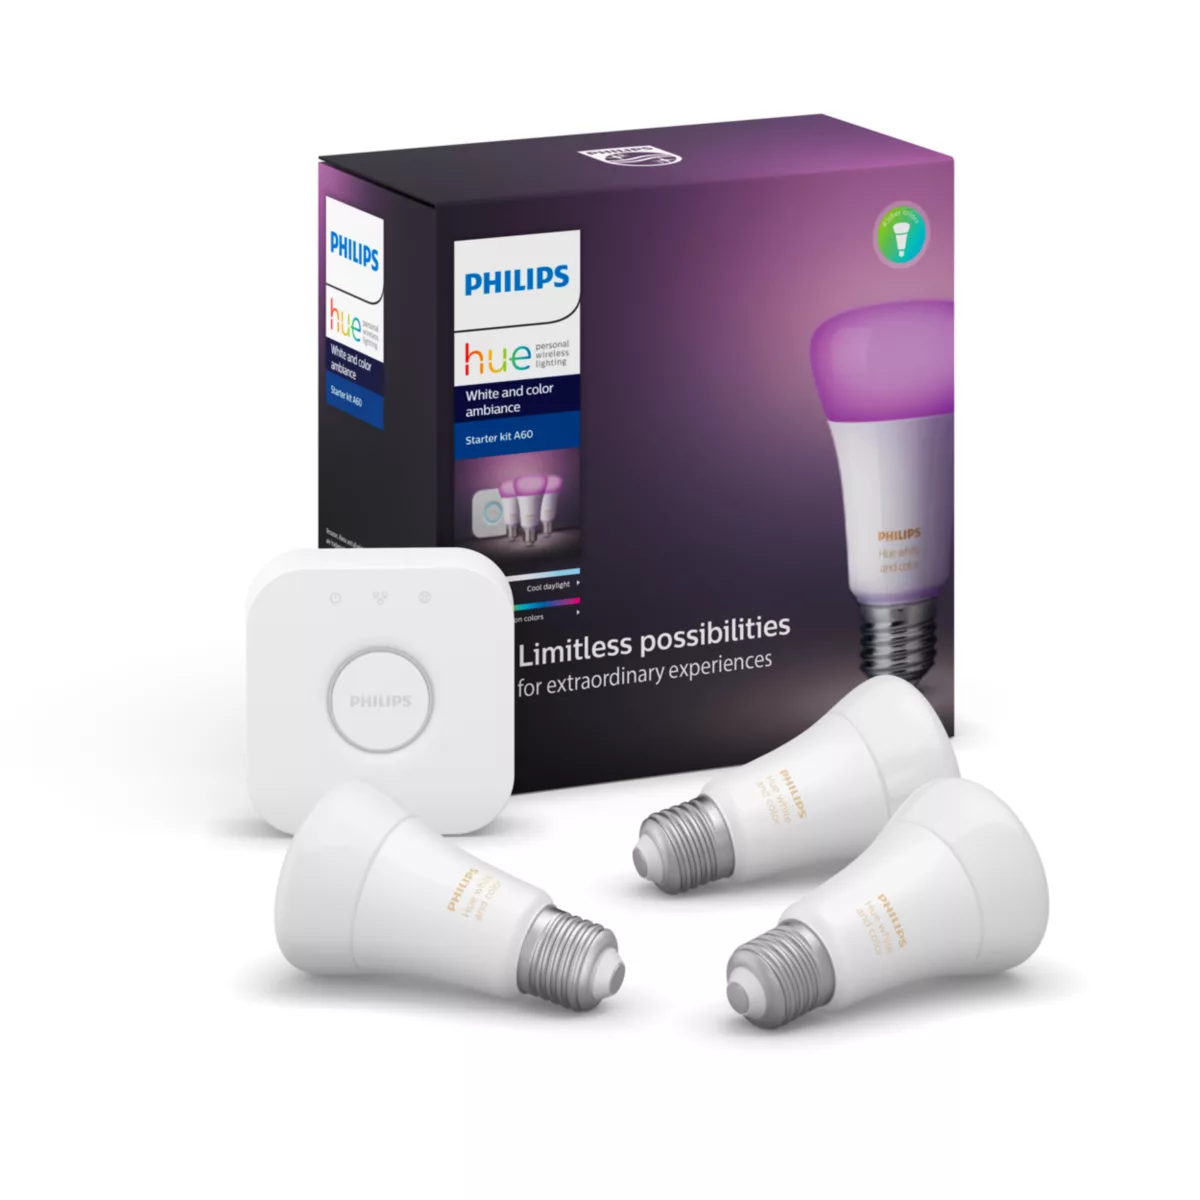 Philips Hue White + Color Ambiance one of the best smart bulbs